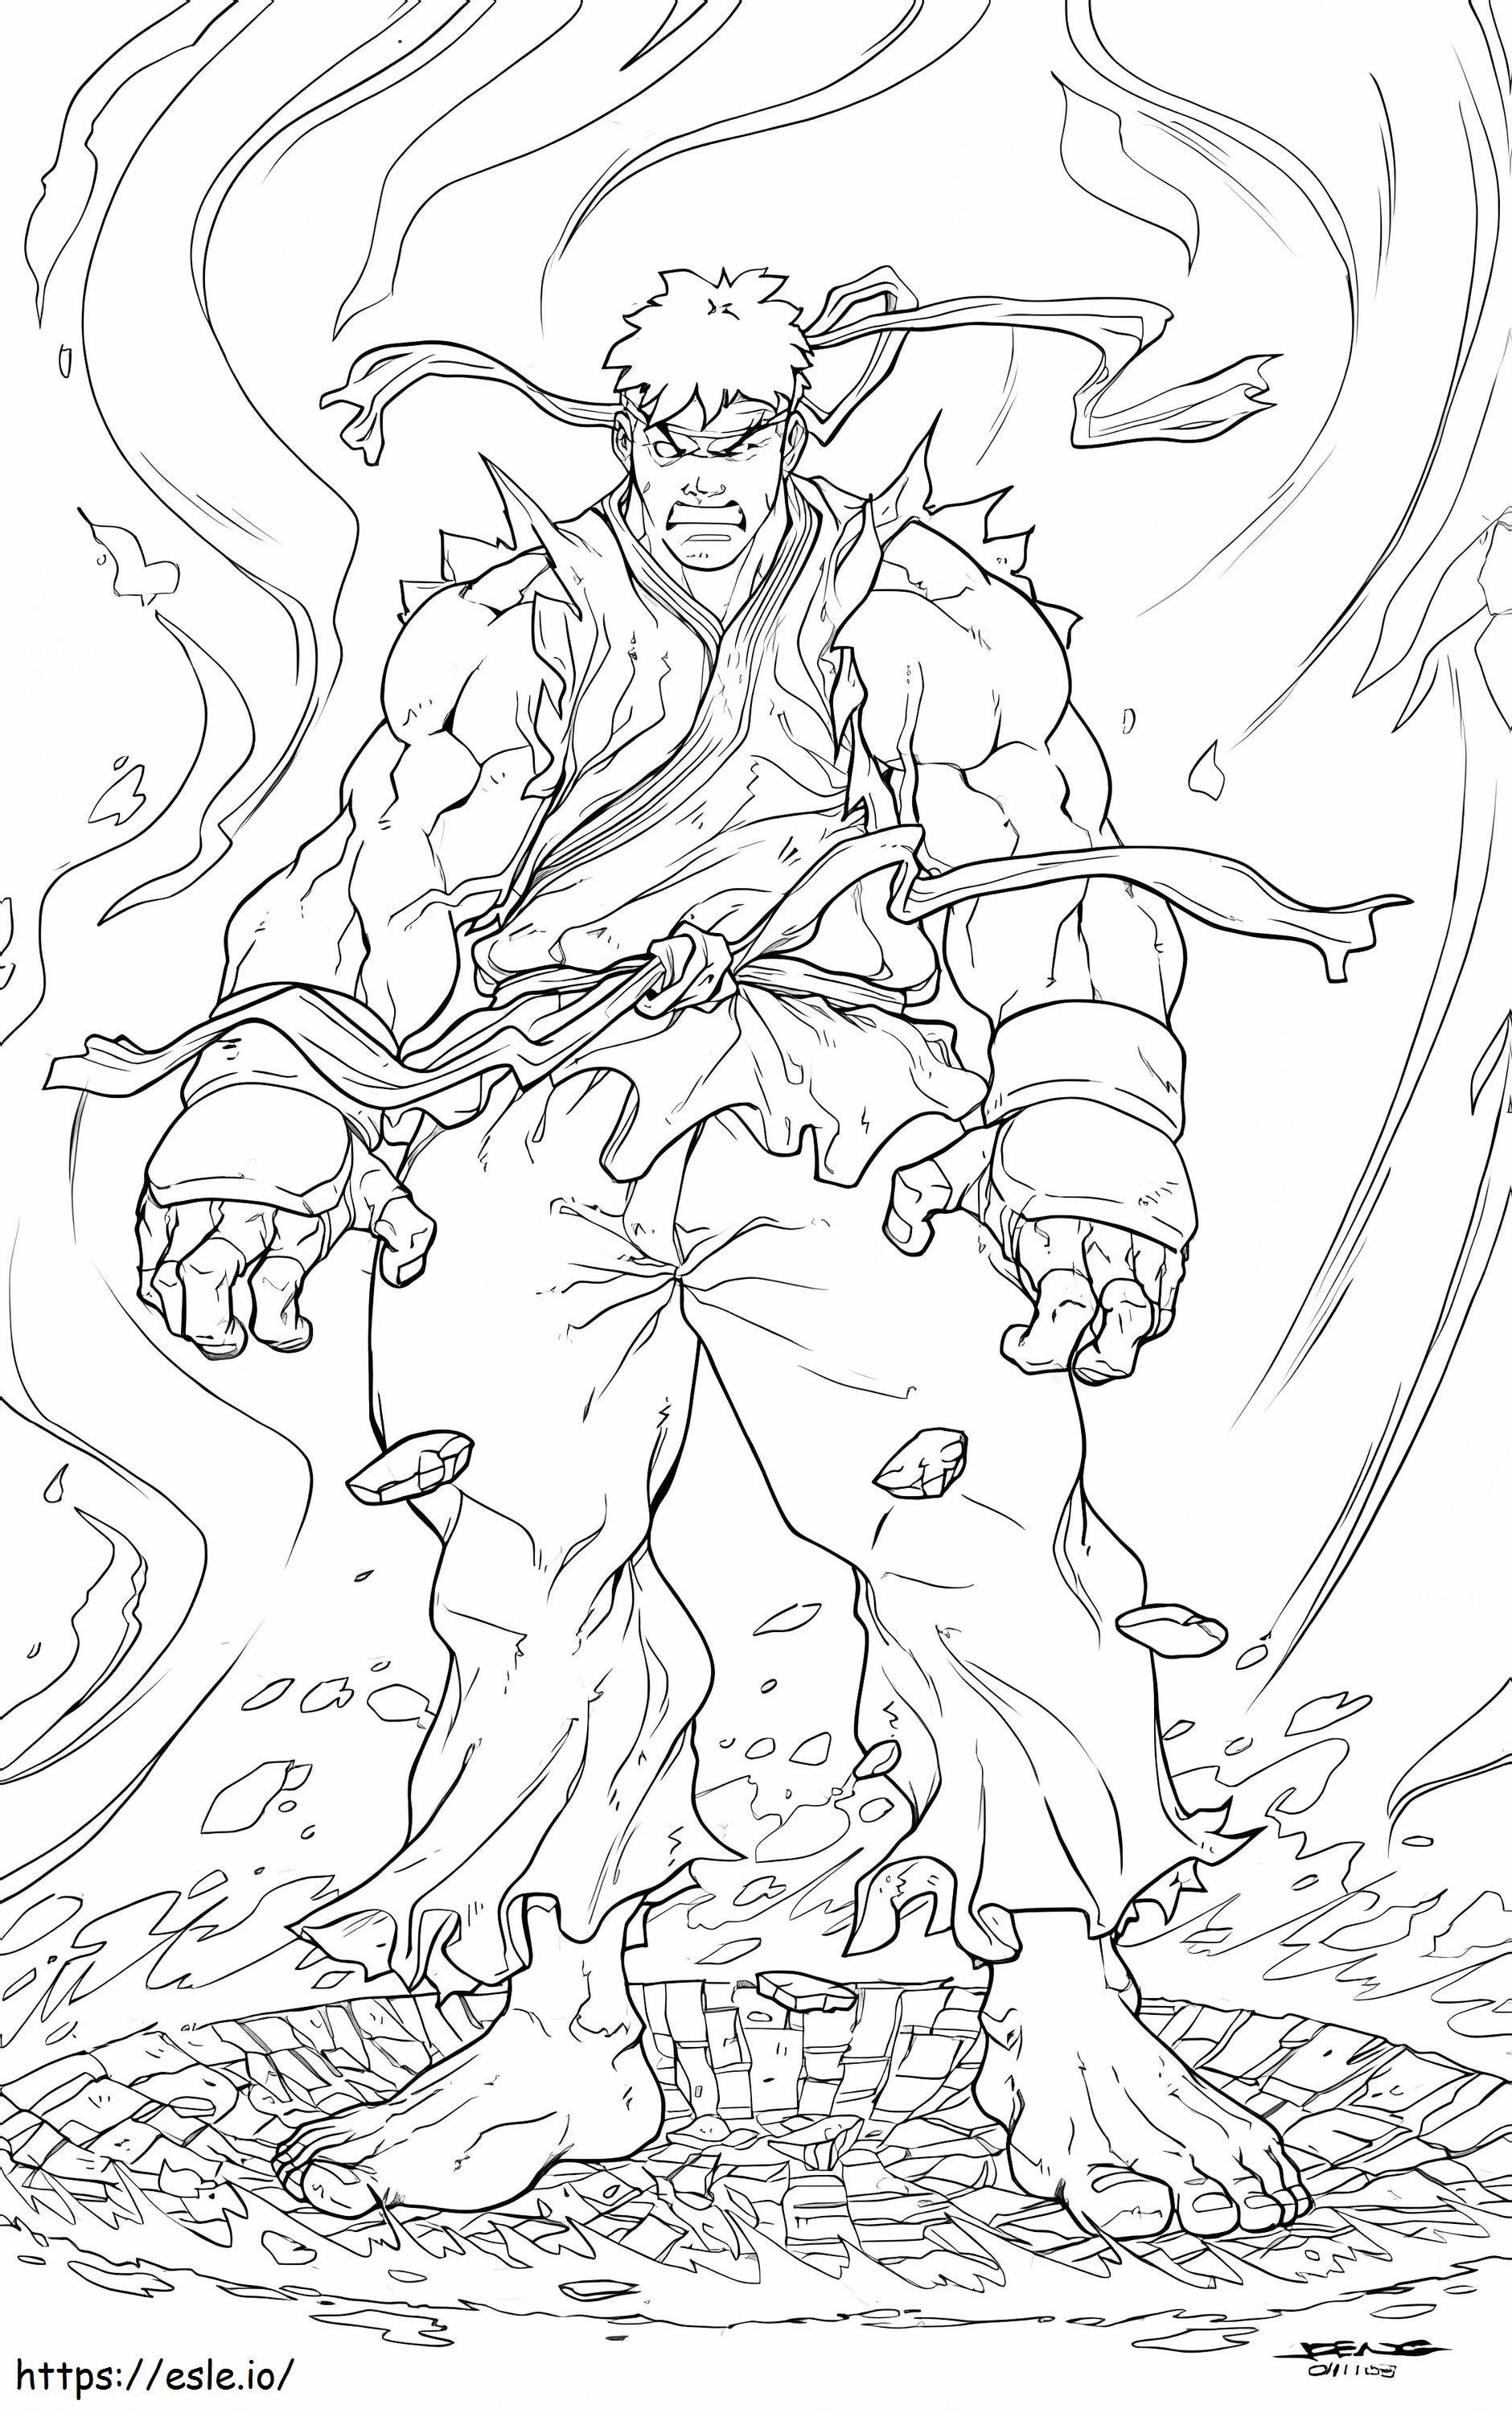 Ryu Fuerte coloring page